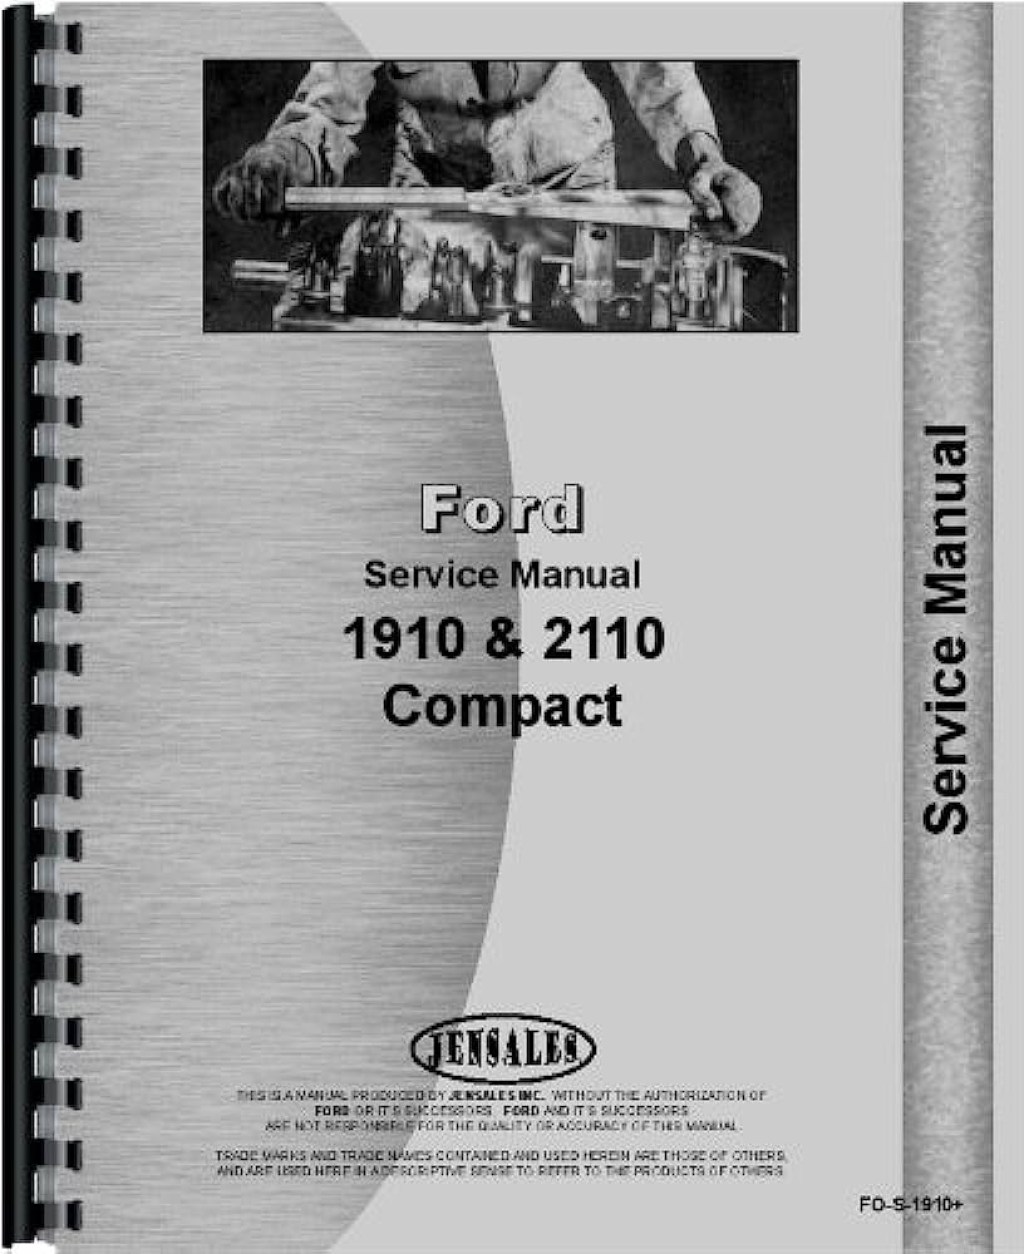 Picture of: Ford   Compact  and  wheel drive Tractor Service Manual  (FO-S-+)